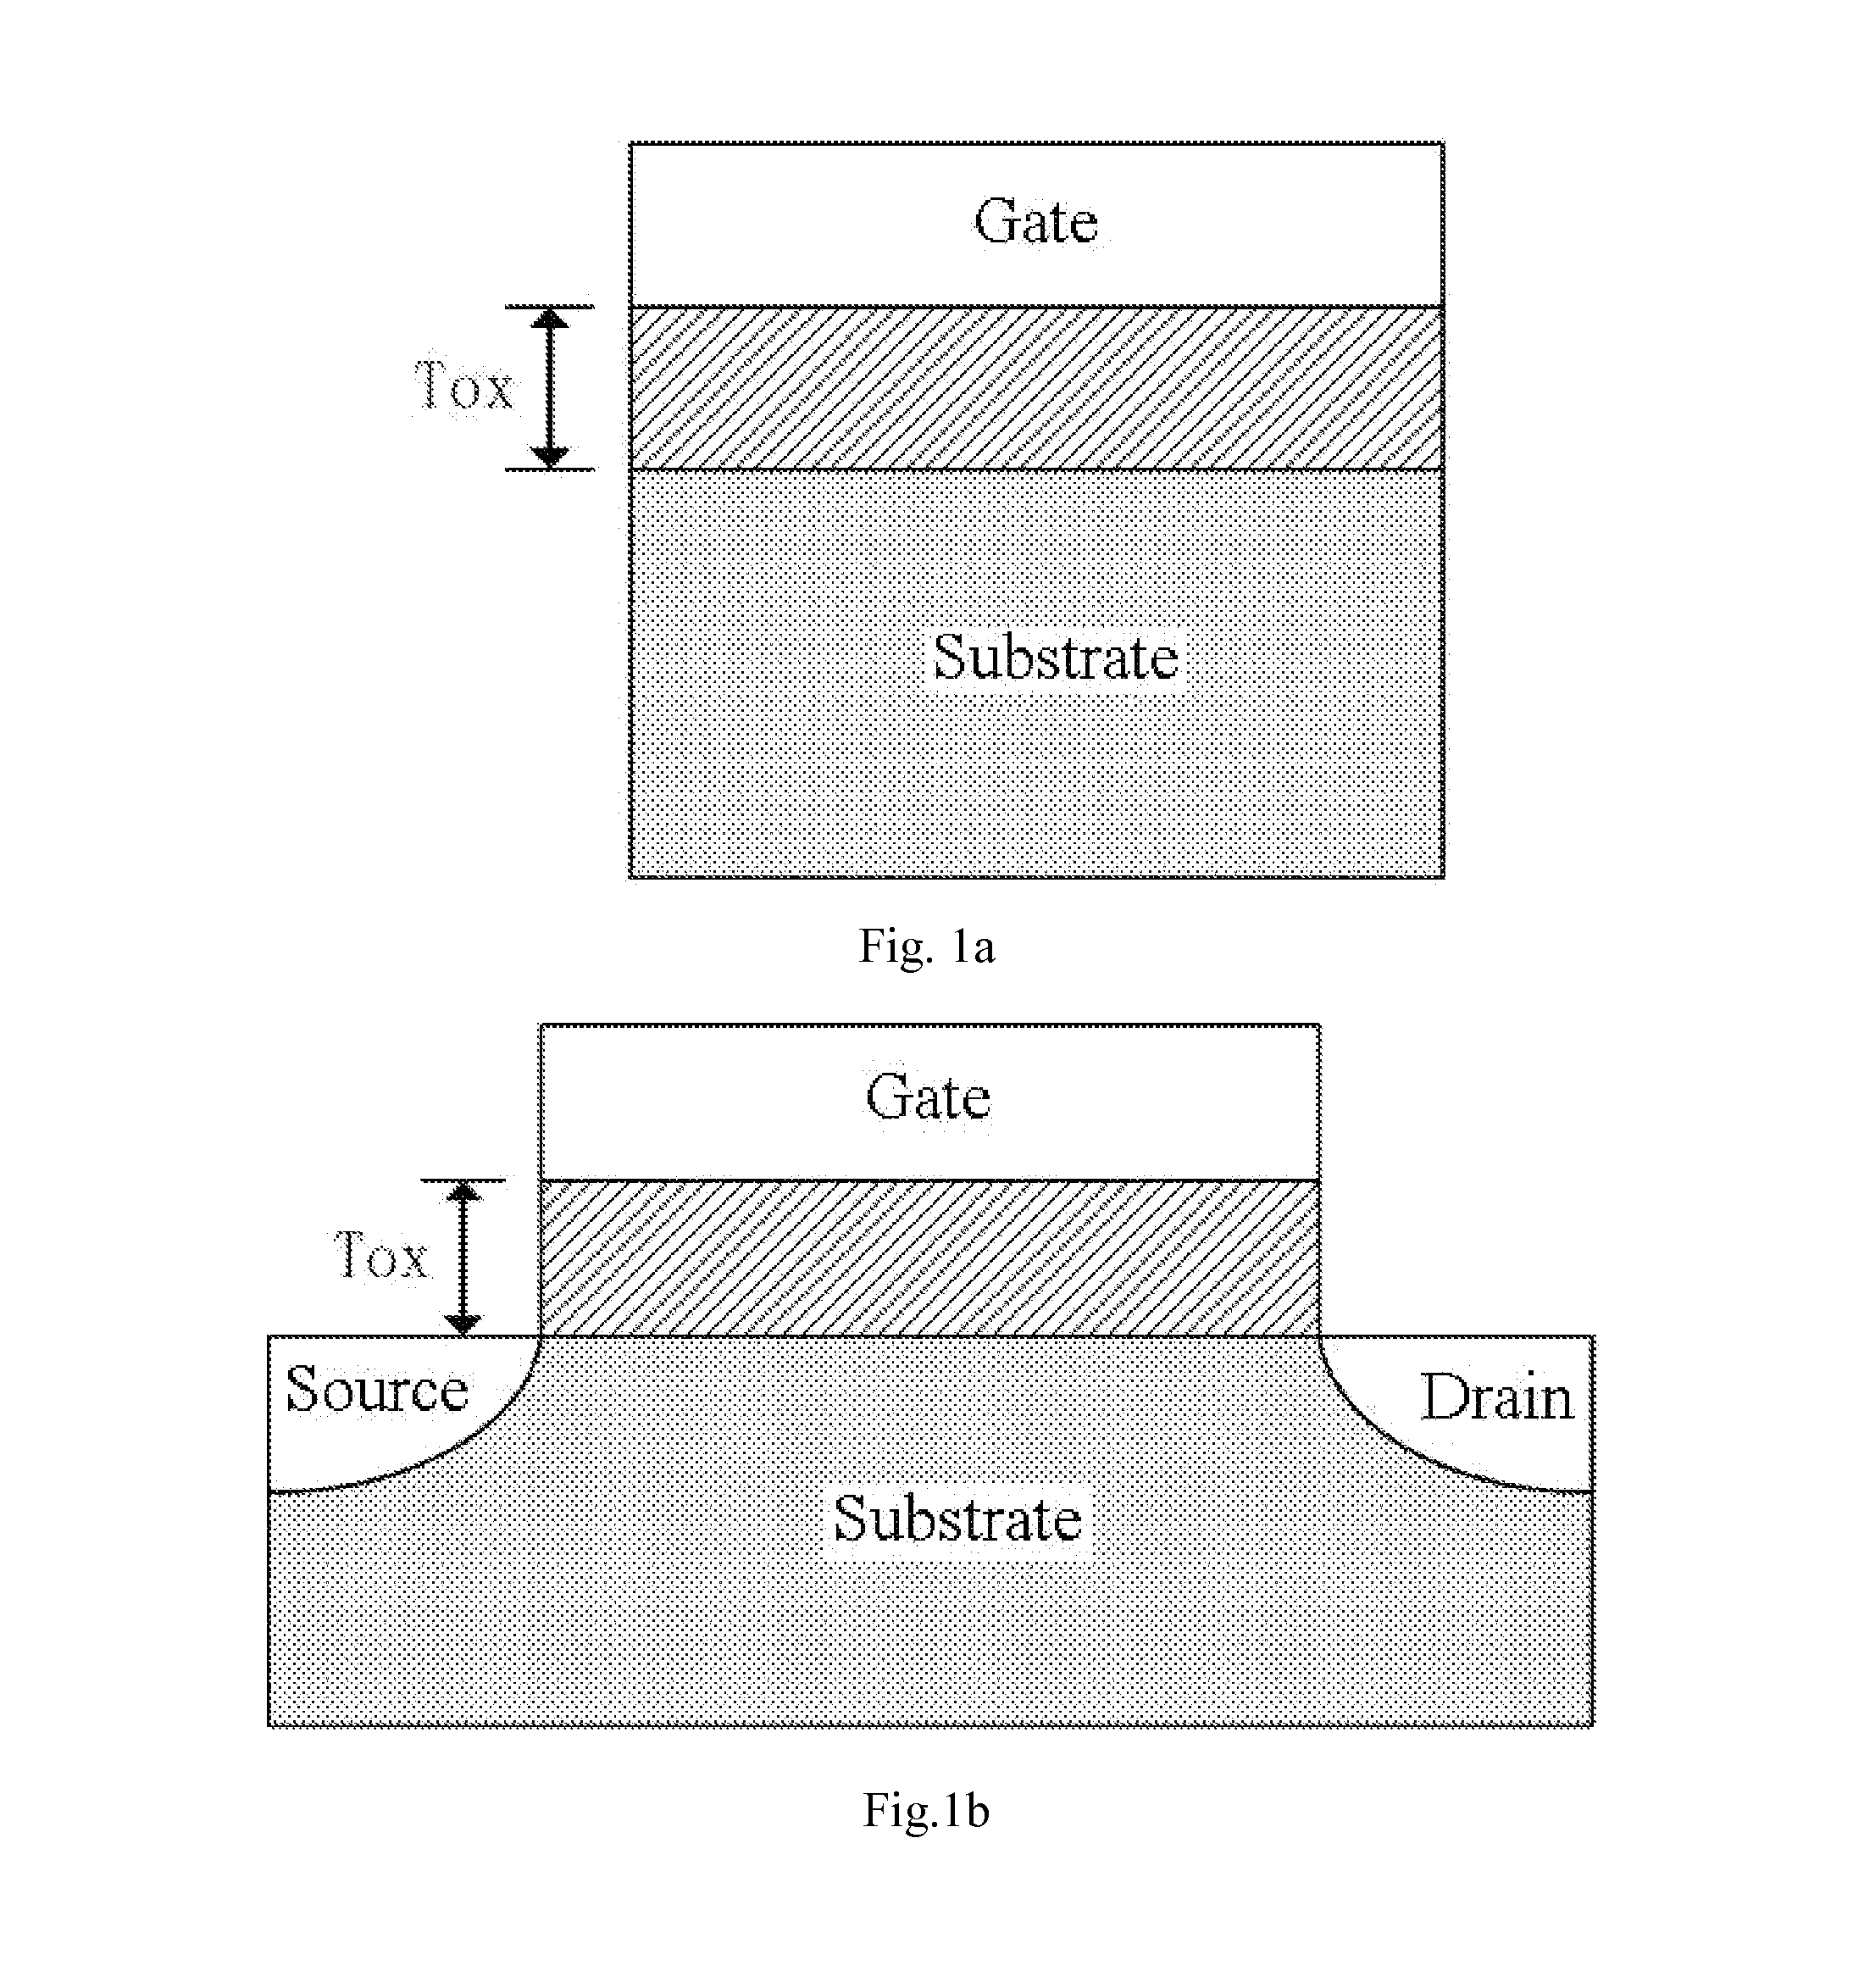 Testing structure and method for interface trap density of gate oxide